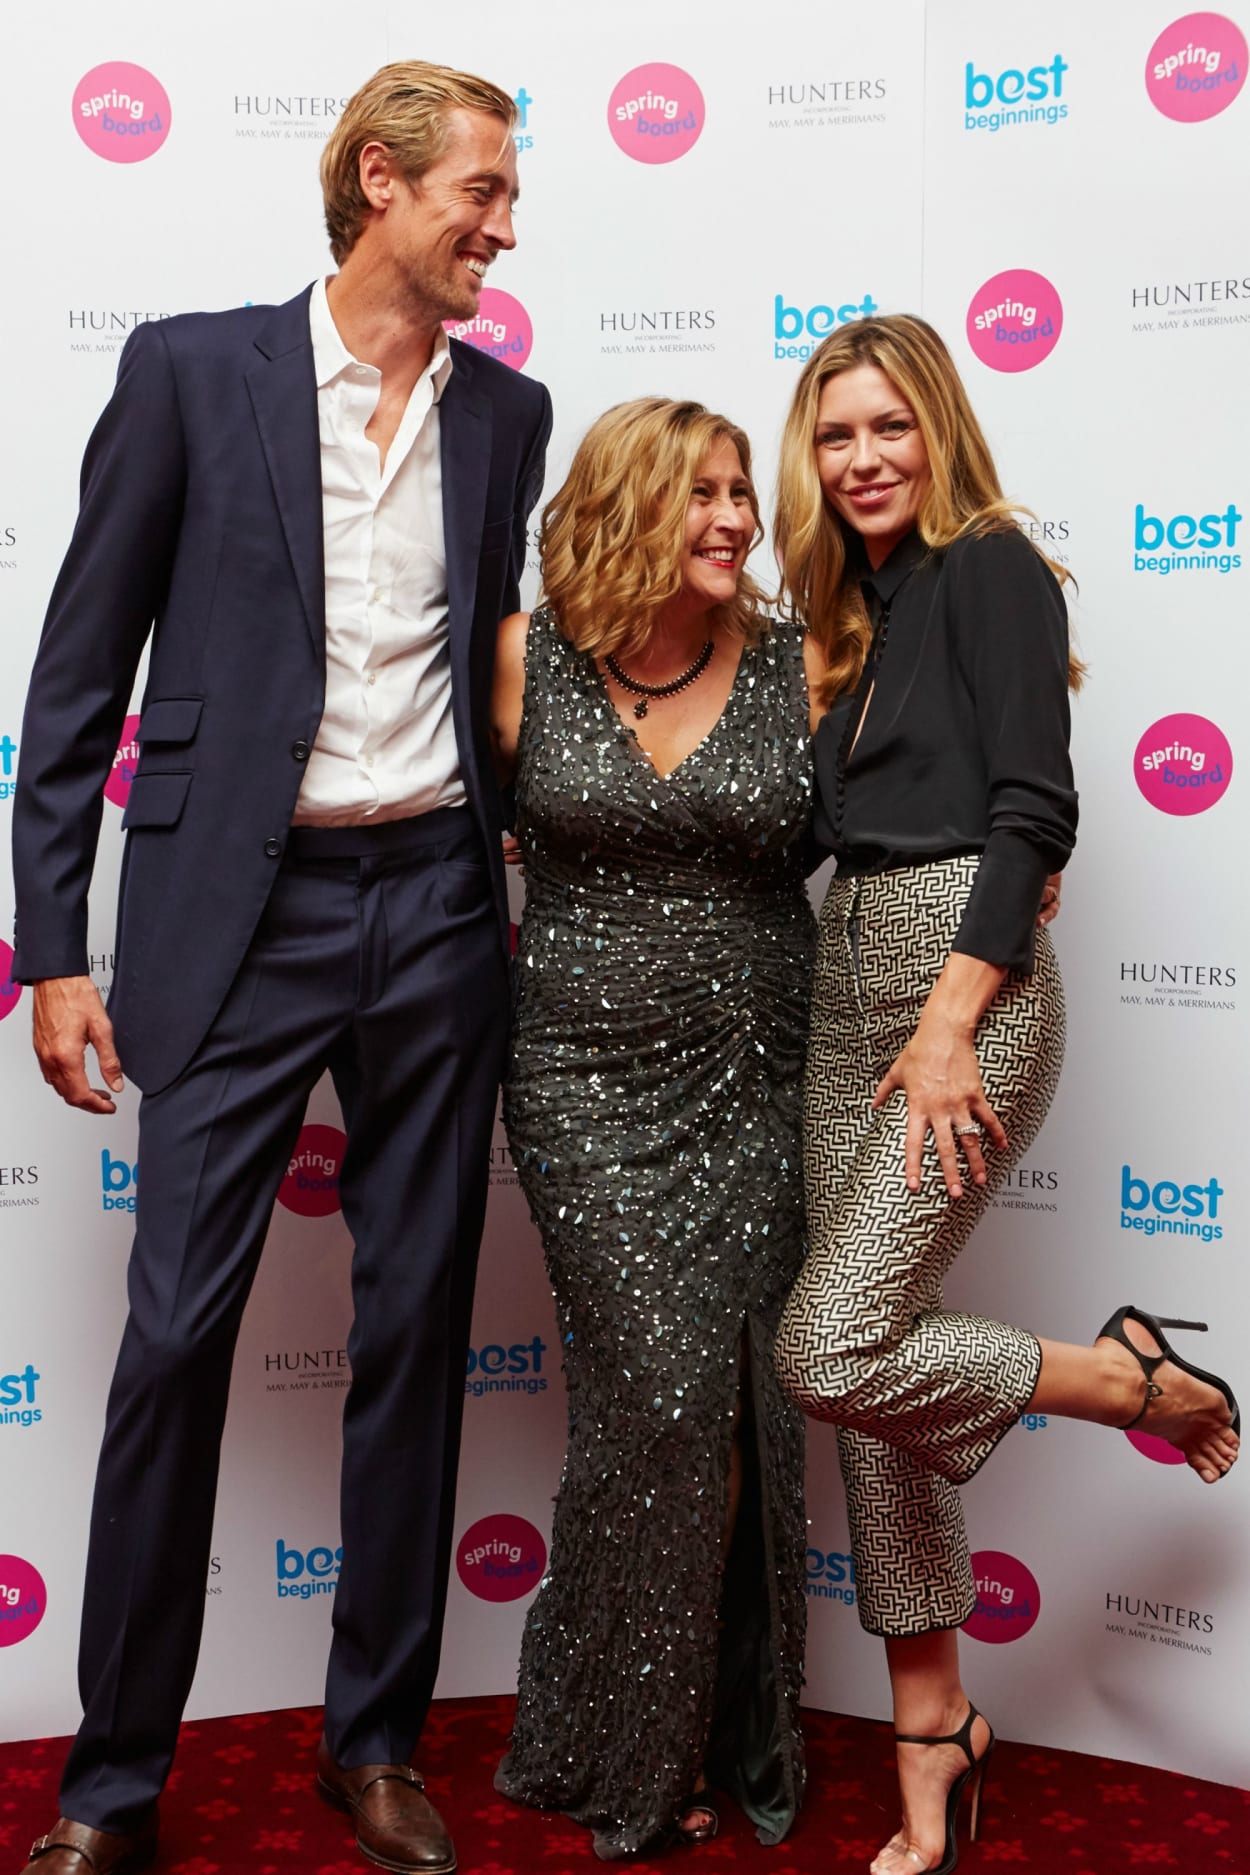 Footballer Peter Crouch (L) and his wife, model and TV presenter Abbey Clancey (R) share a joke with Best Beginnings CEO, Alison Baum, at the Springboard launch event.